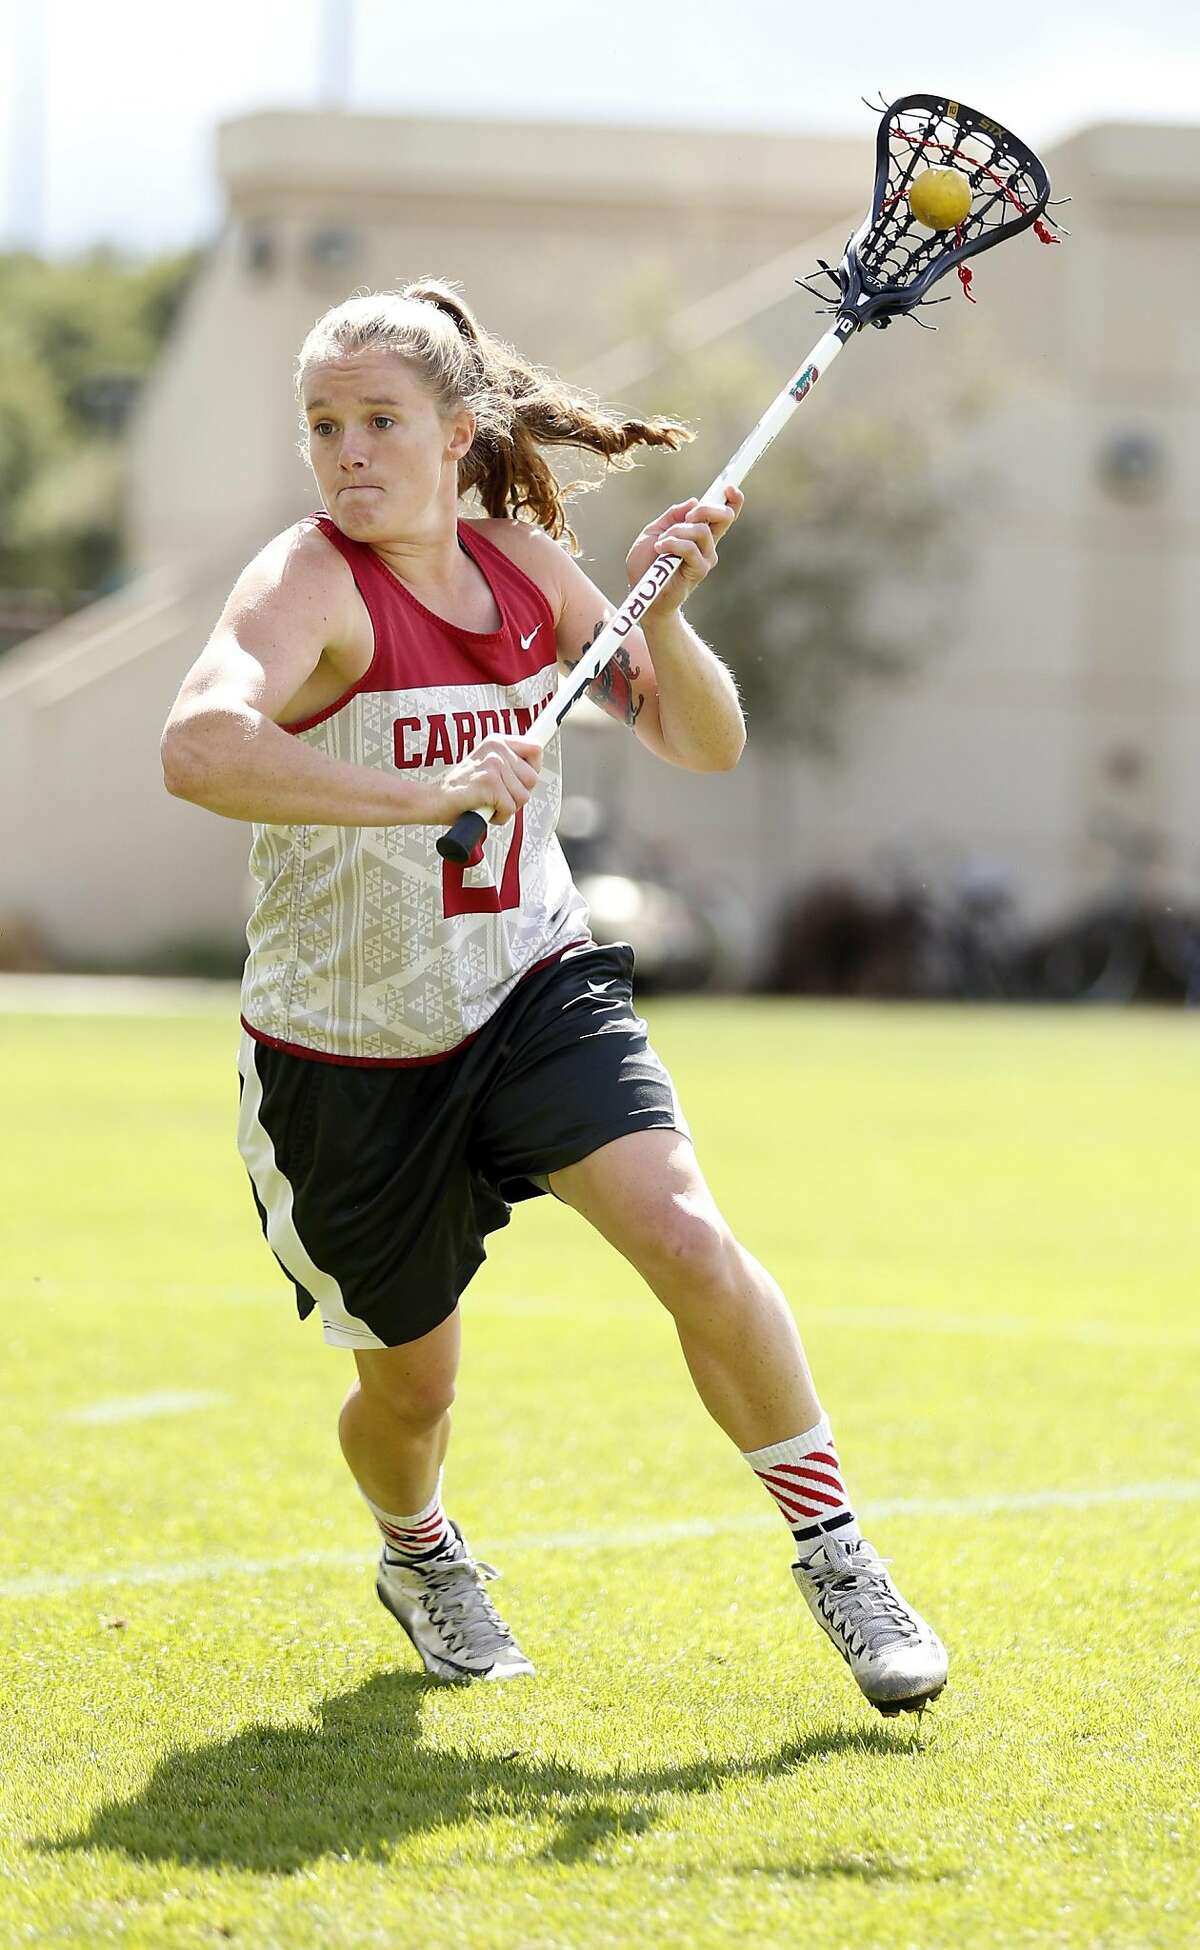 Stanford Lacrosse's Anna Salemo during practice in Stanford, Calif., on Thursday, May 5, 2016.